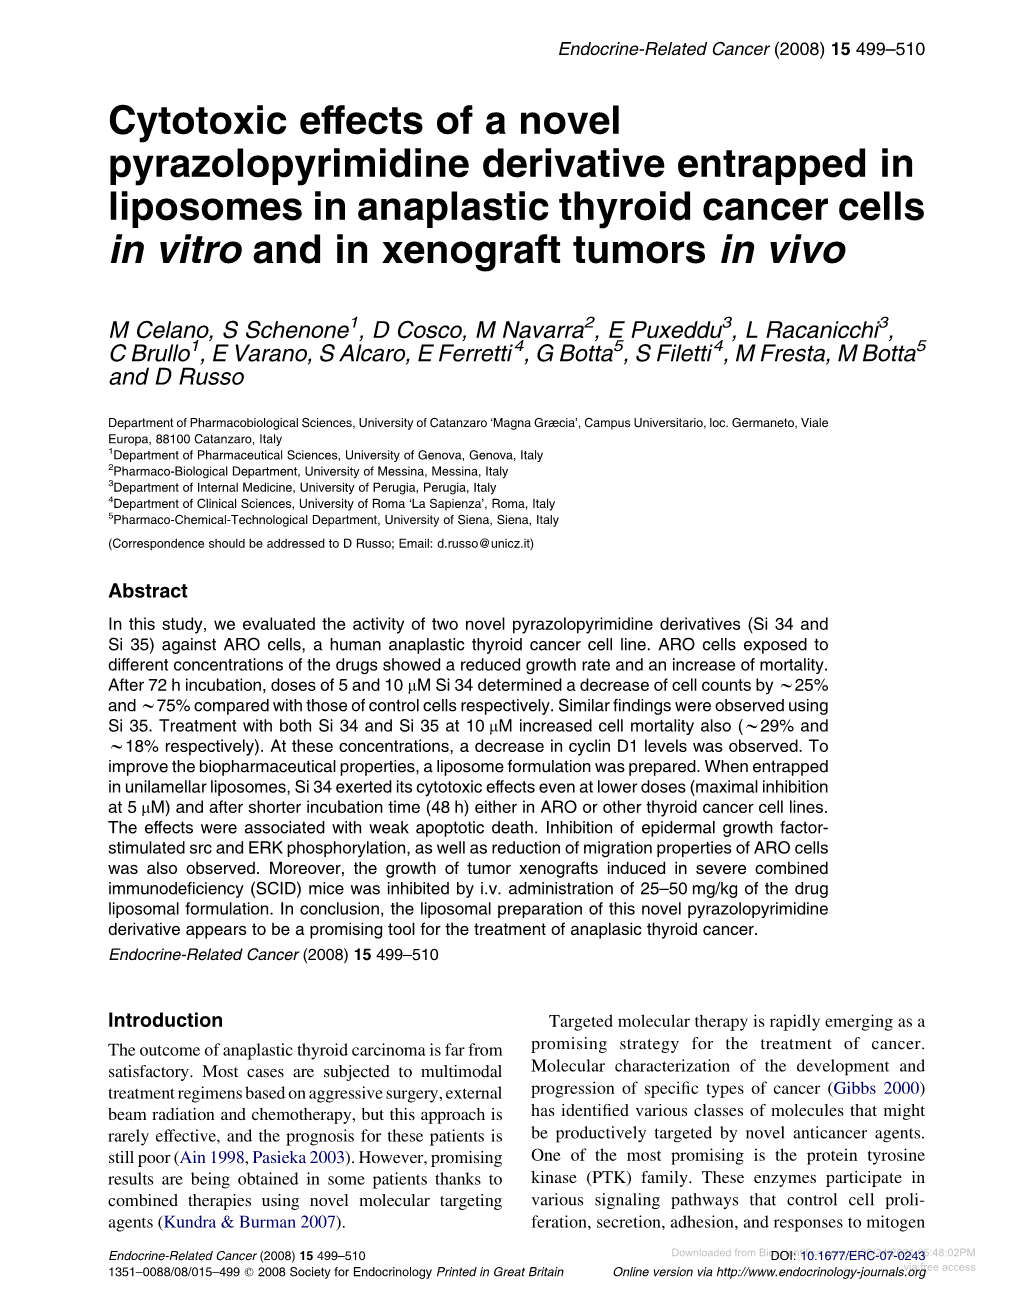 Cytotoxic Effects of a Novel Pyrazolopyrimidine Derivative Entrapped in Liposomes in Anaplastic Thyroid Cancer Cells in Vitro and in Xenograft Tumors in Vivo